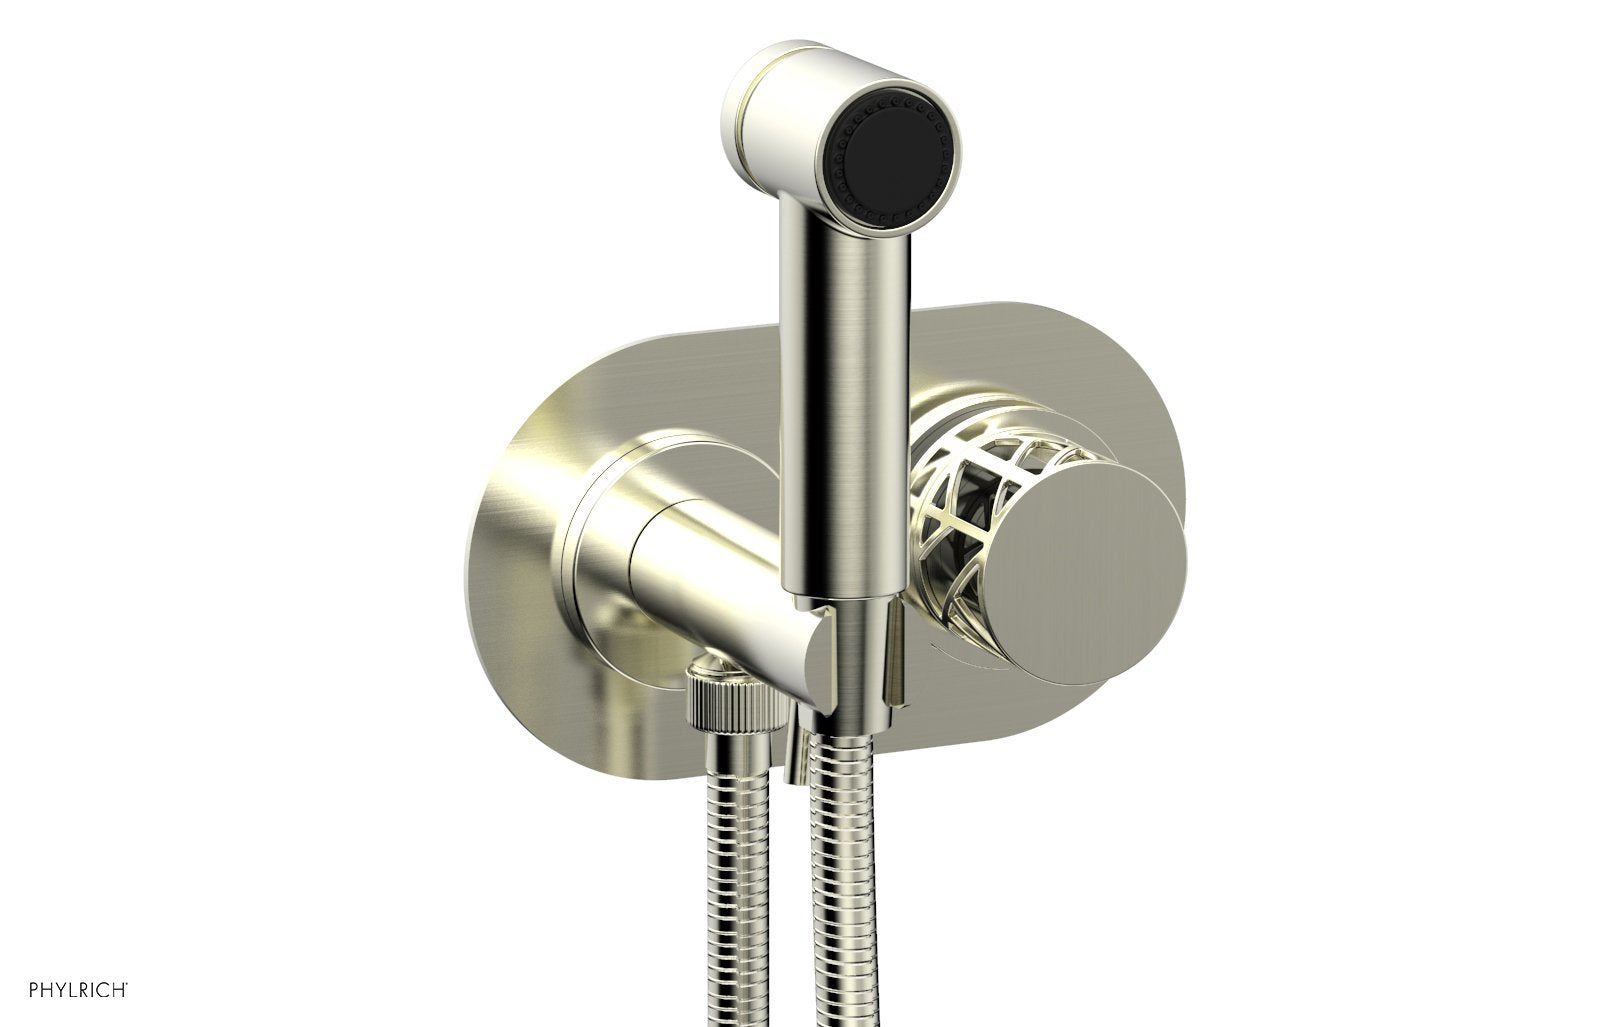 Phylrich JOLIE Wall Mounted Bidet, Round Handle with "Black" Accents